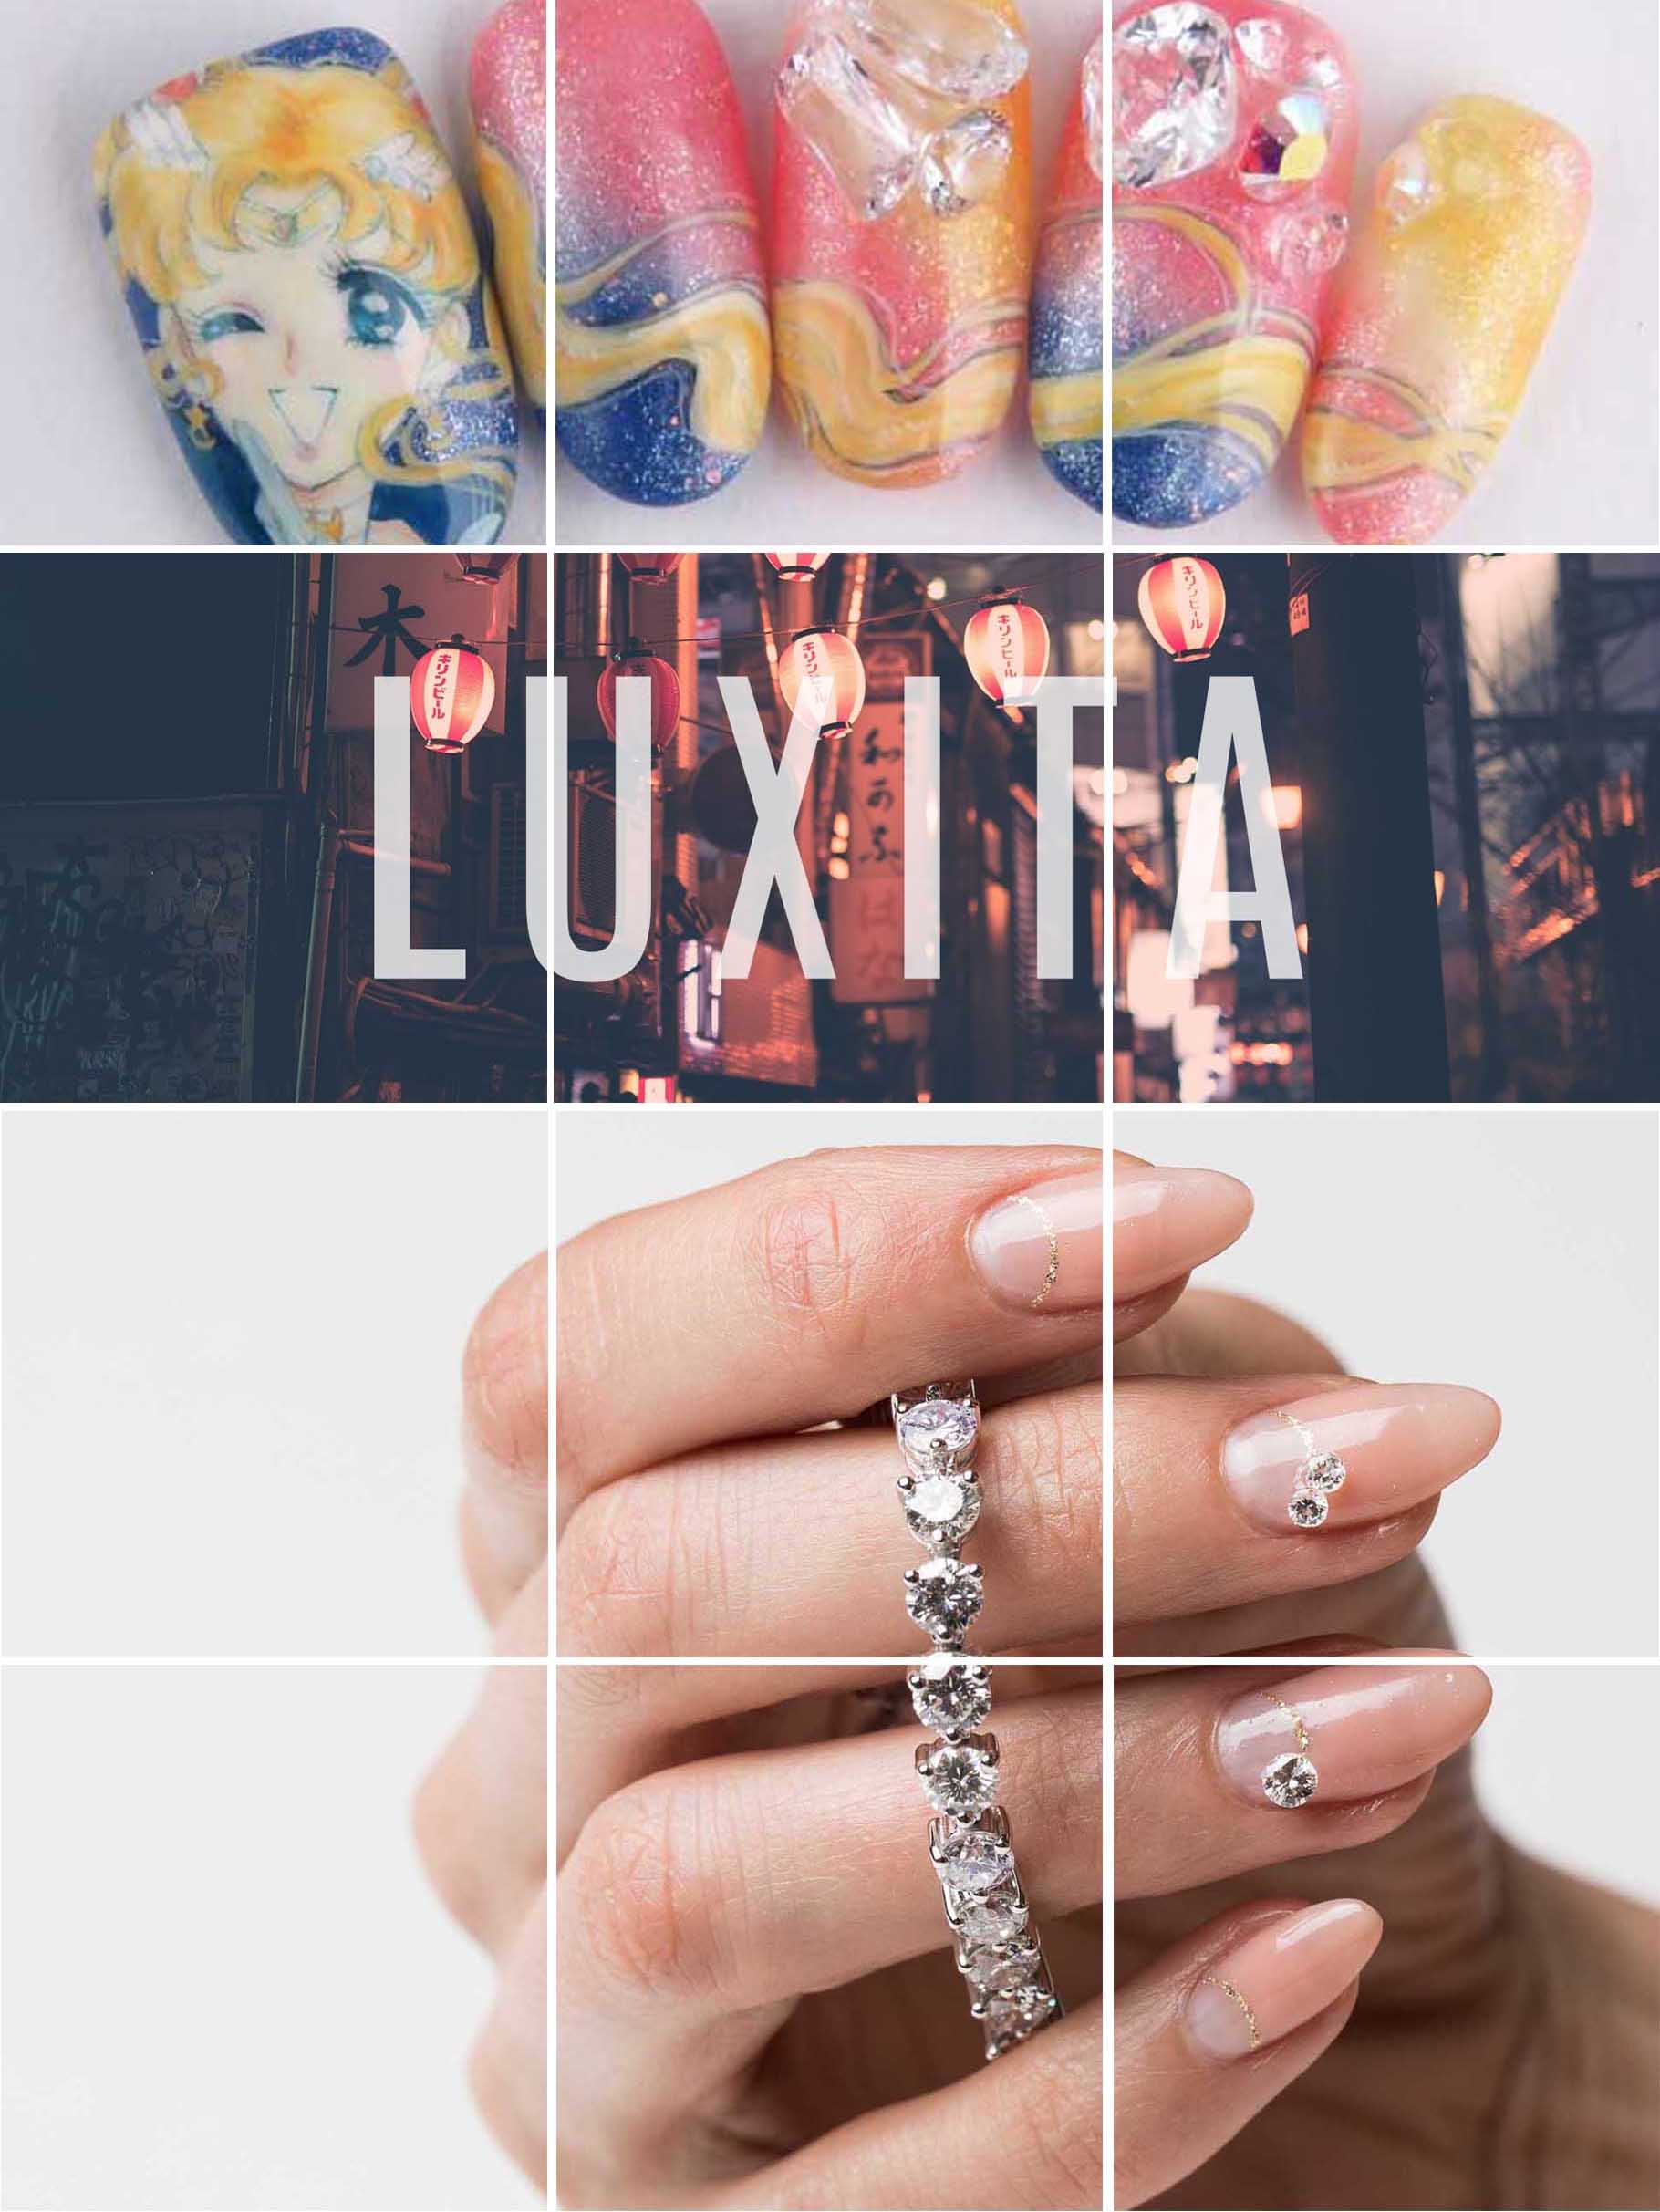 Instagram grid by Katherine Delorme. Sailor Moon nail designs, text 'LUXITA' and diamond nails.